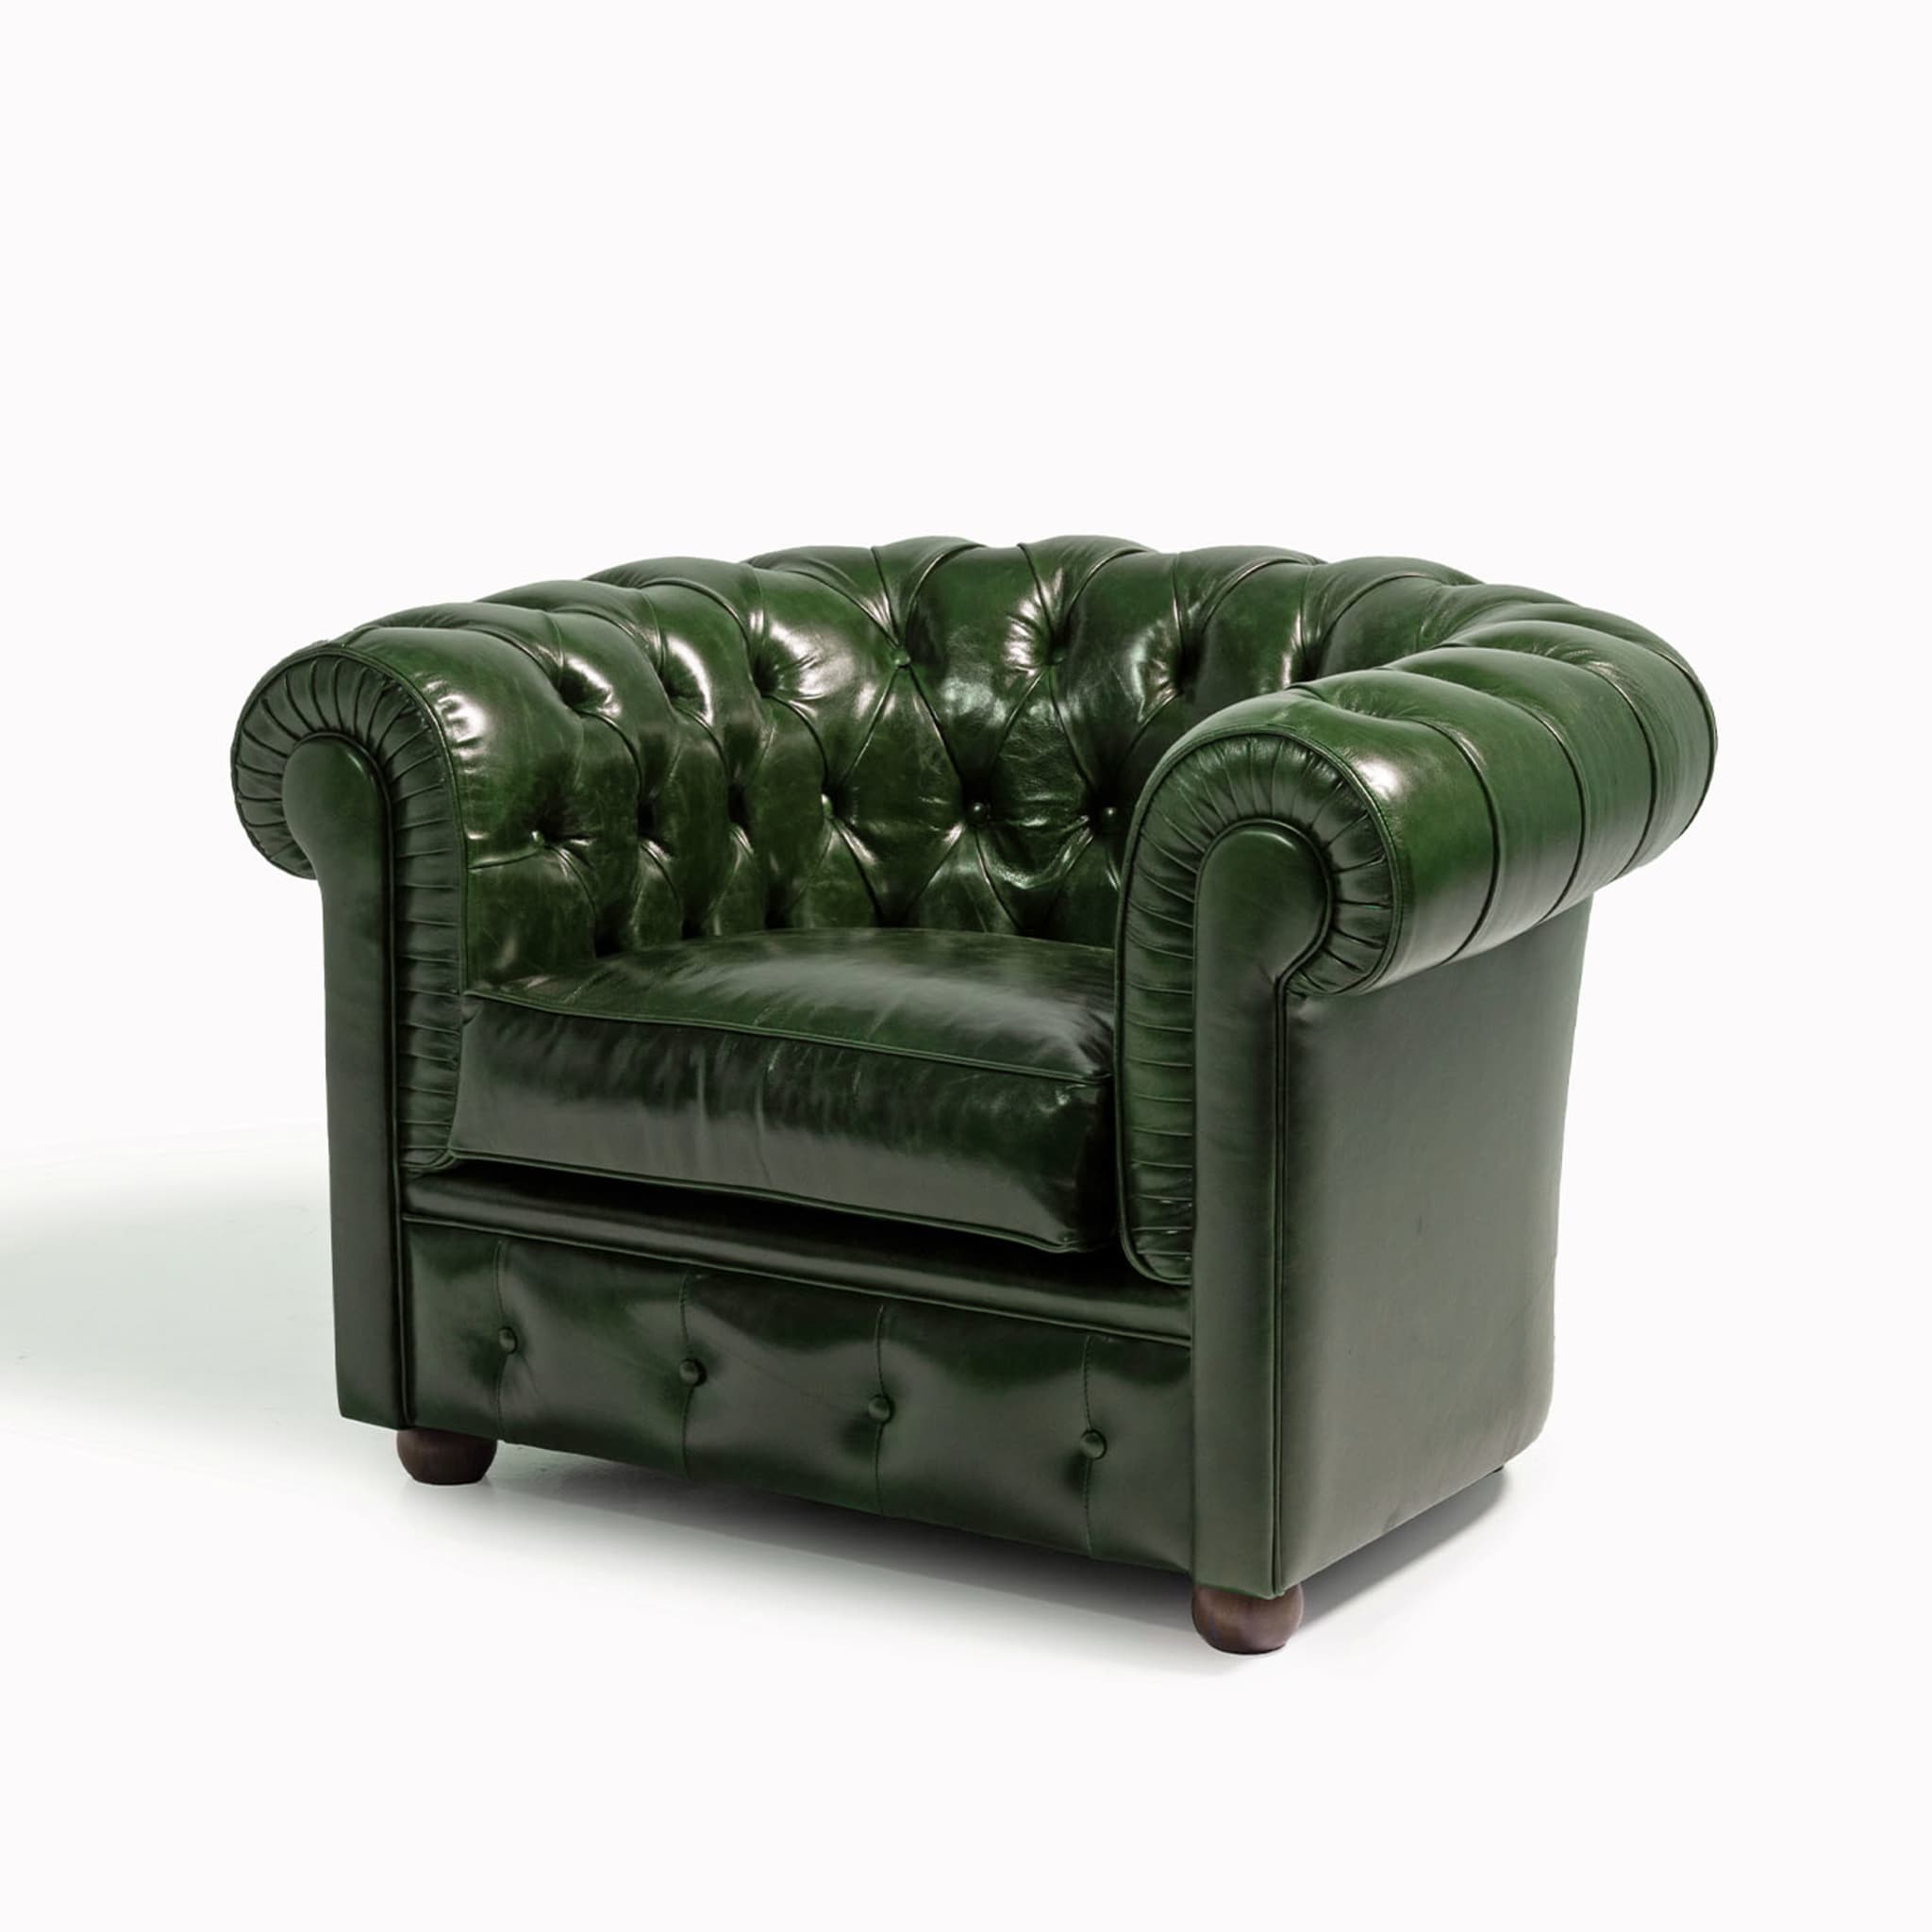 Chesterfield Green Leather Armchair - Alternative view 1